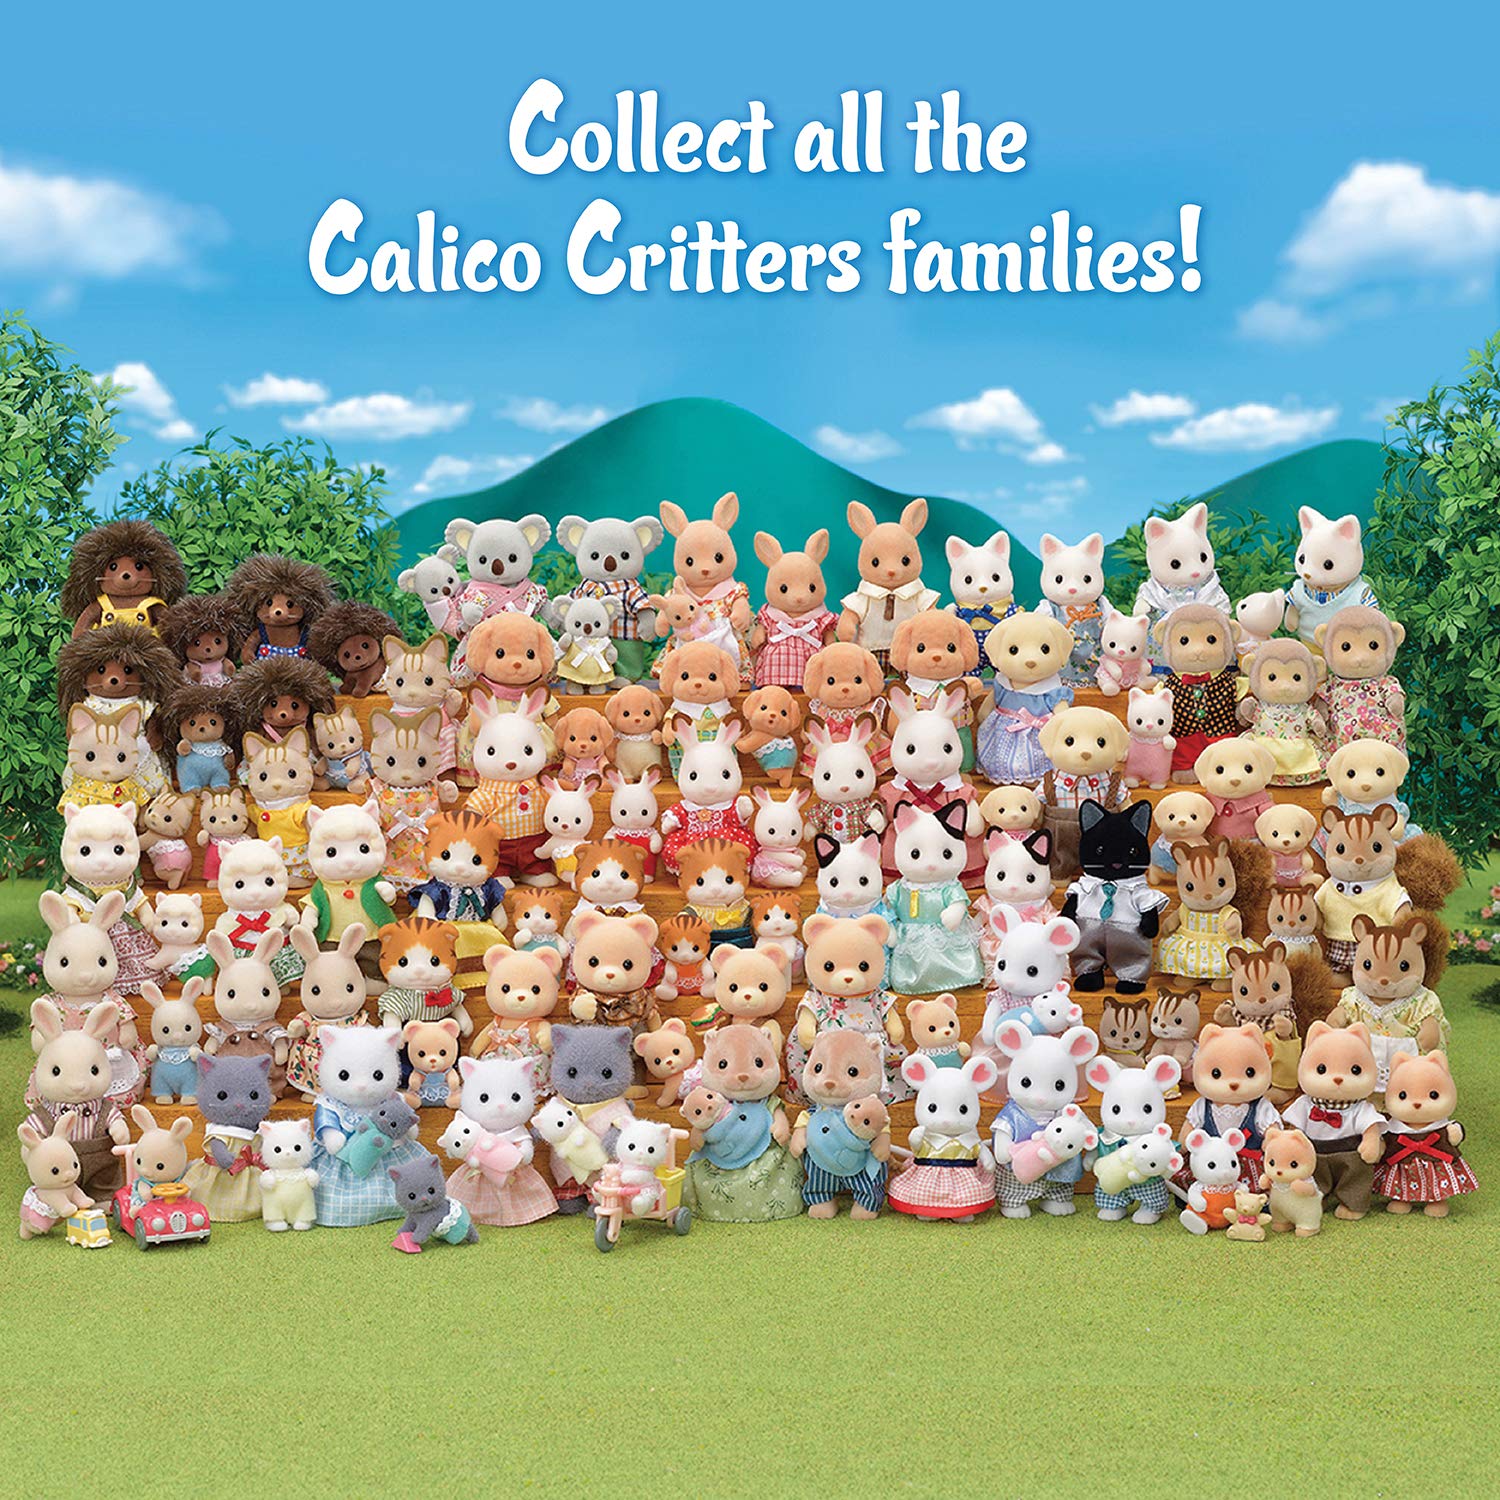 Calico Critters, Hopper Kangaroo Family, Dolls, Dollhouse Figures, Collectible Toys